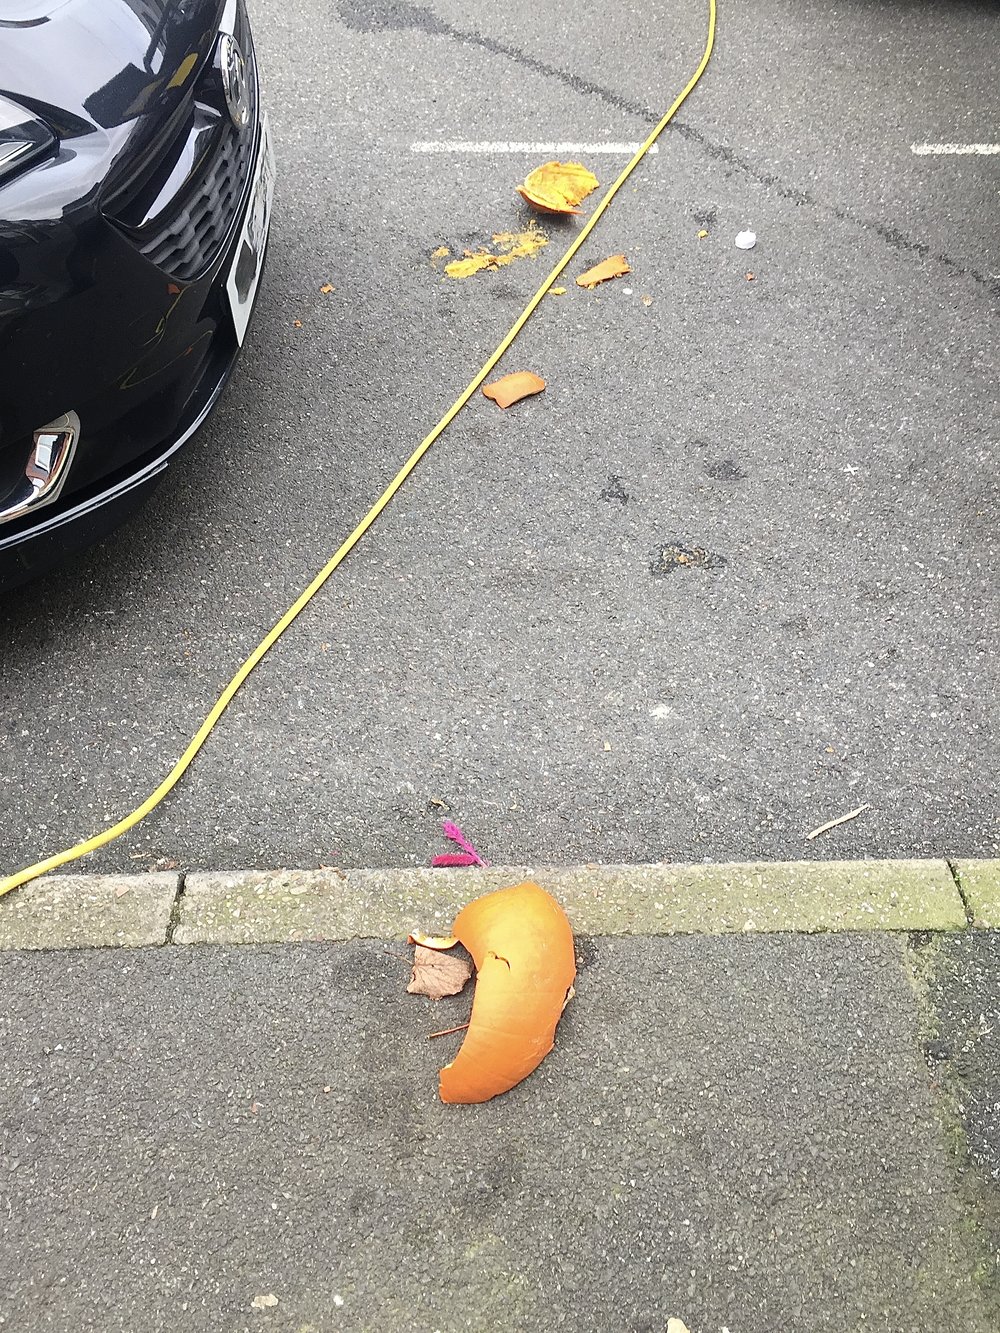  Parts of a broken and smashed pumpkin on a road and pavement. 